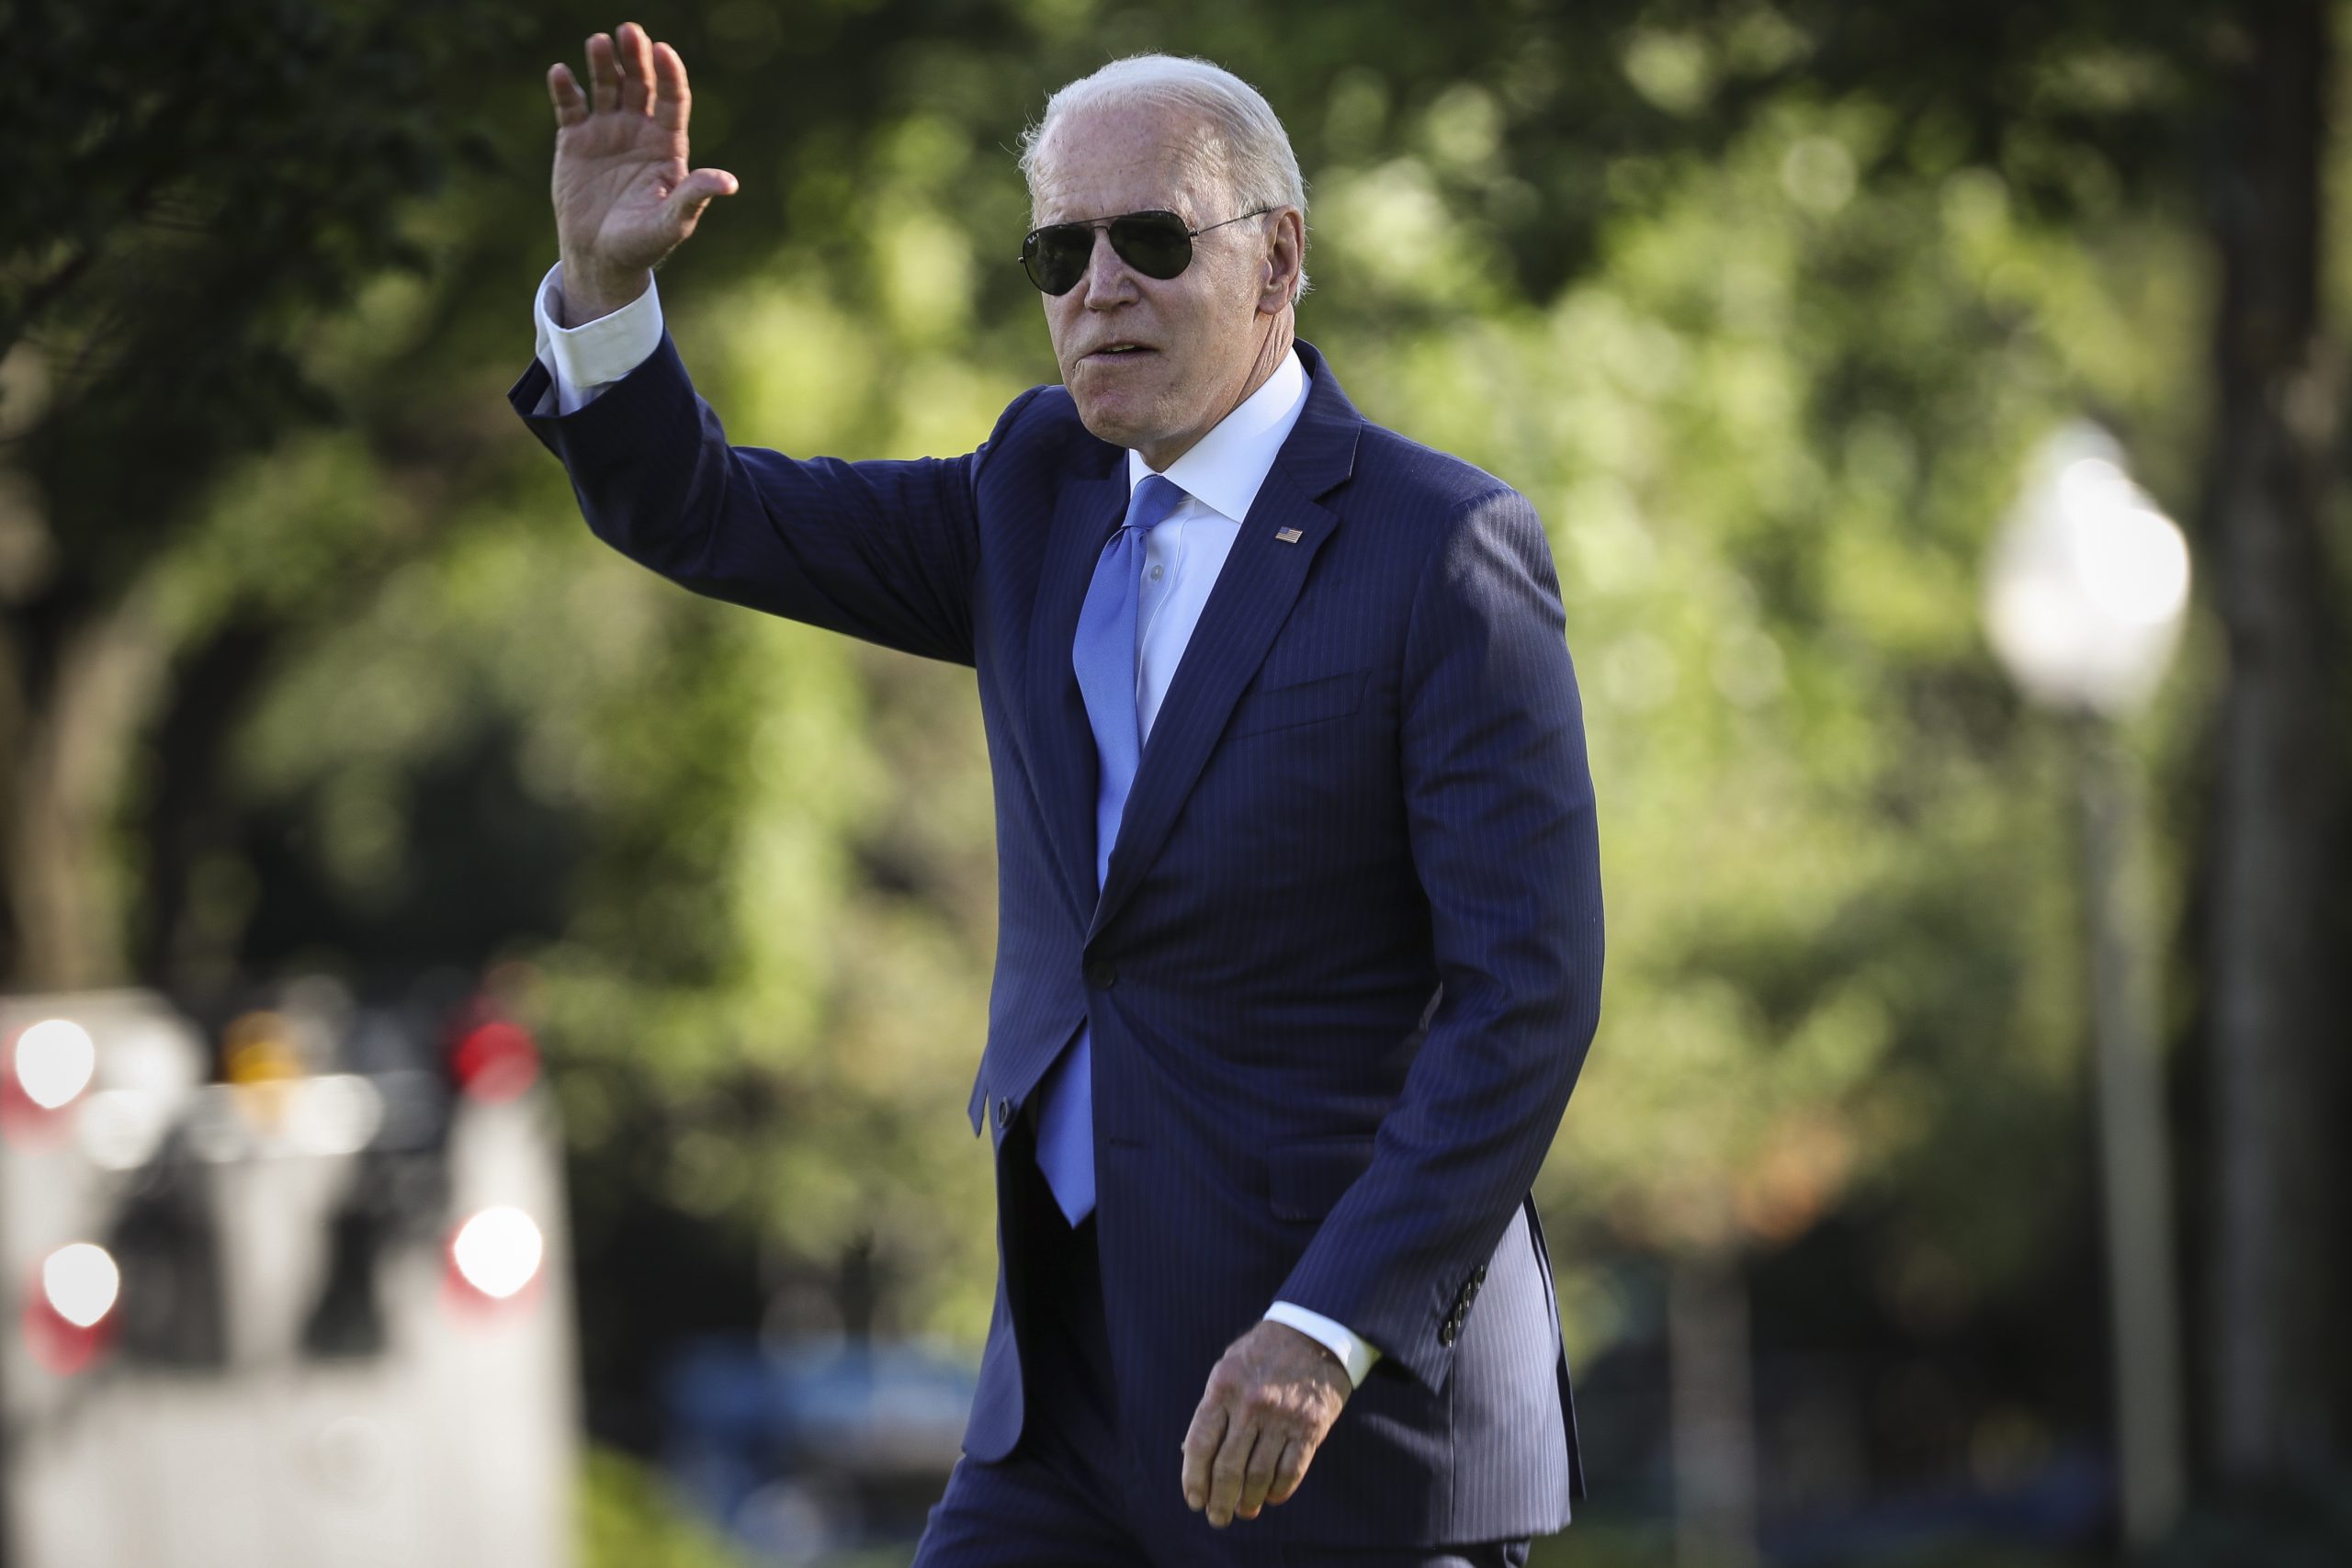 epa09301985 US President Joe Biden waves as he walks on the South Lawn of the White House before boarding Marine One in Washington, DC, USA, 25 June 2021 for a trip to Camp David.  EPA/Oliver Contreras / POOL